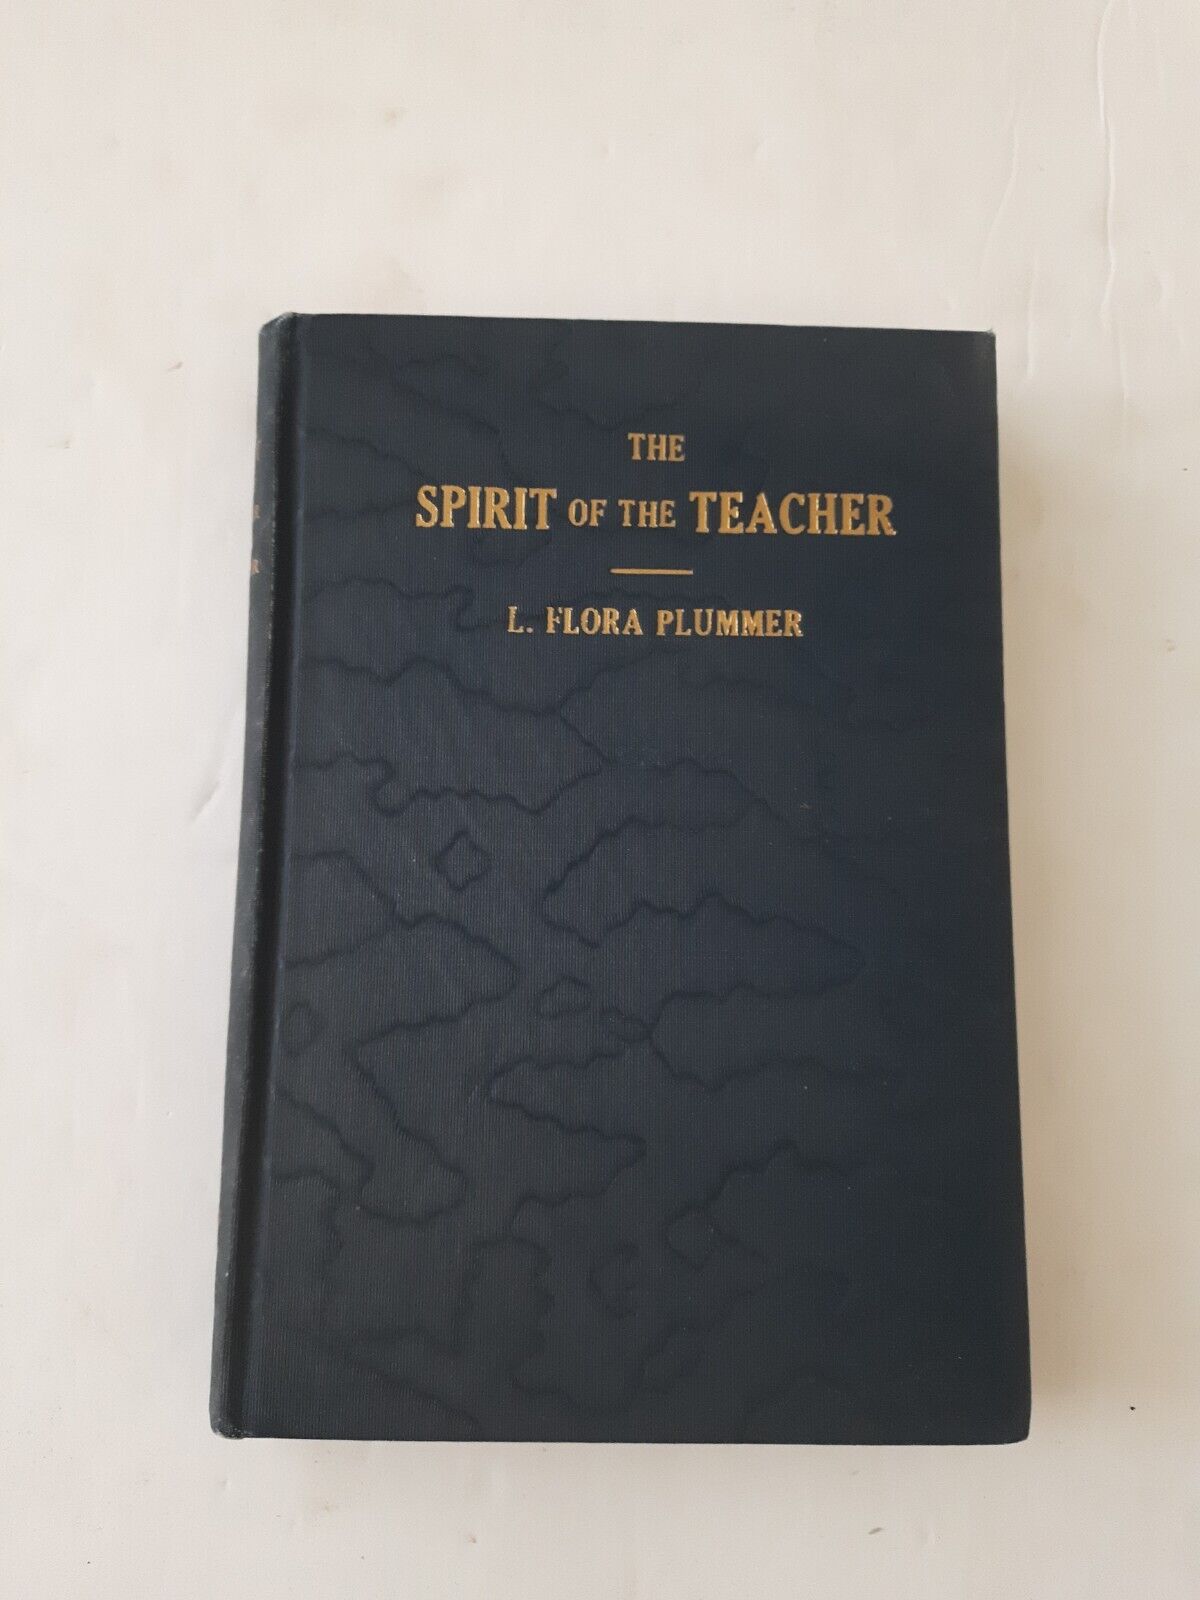 Vintage SS SDA Book The Spirit of the Teacher by F PLUMMER ©1935 Review & Herald